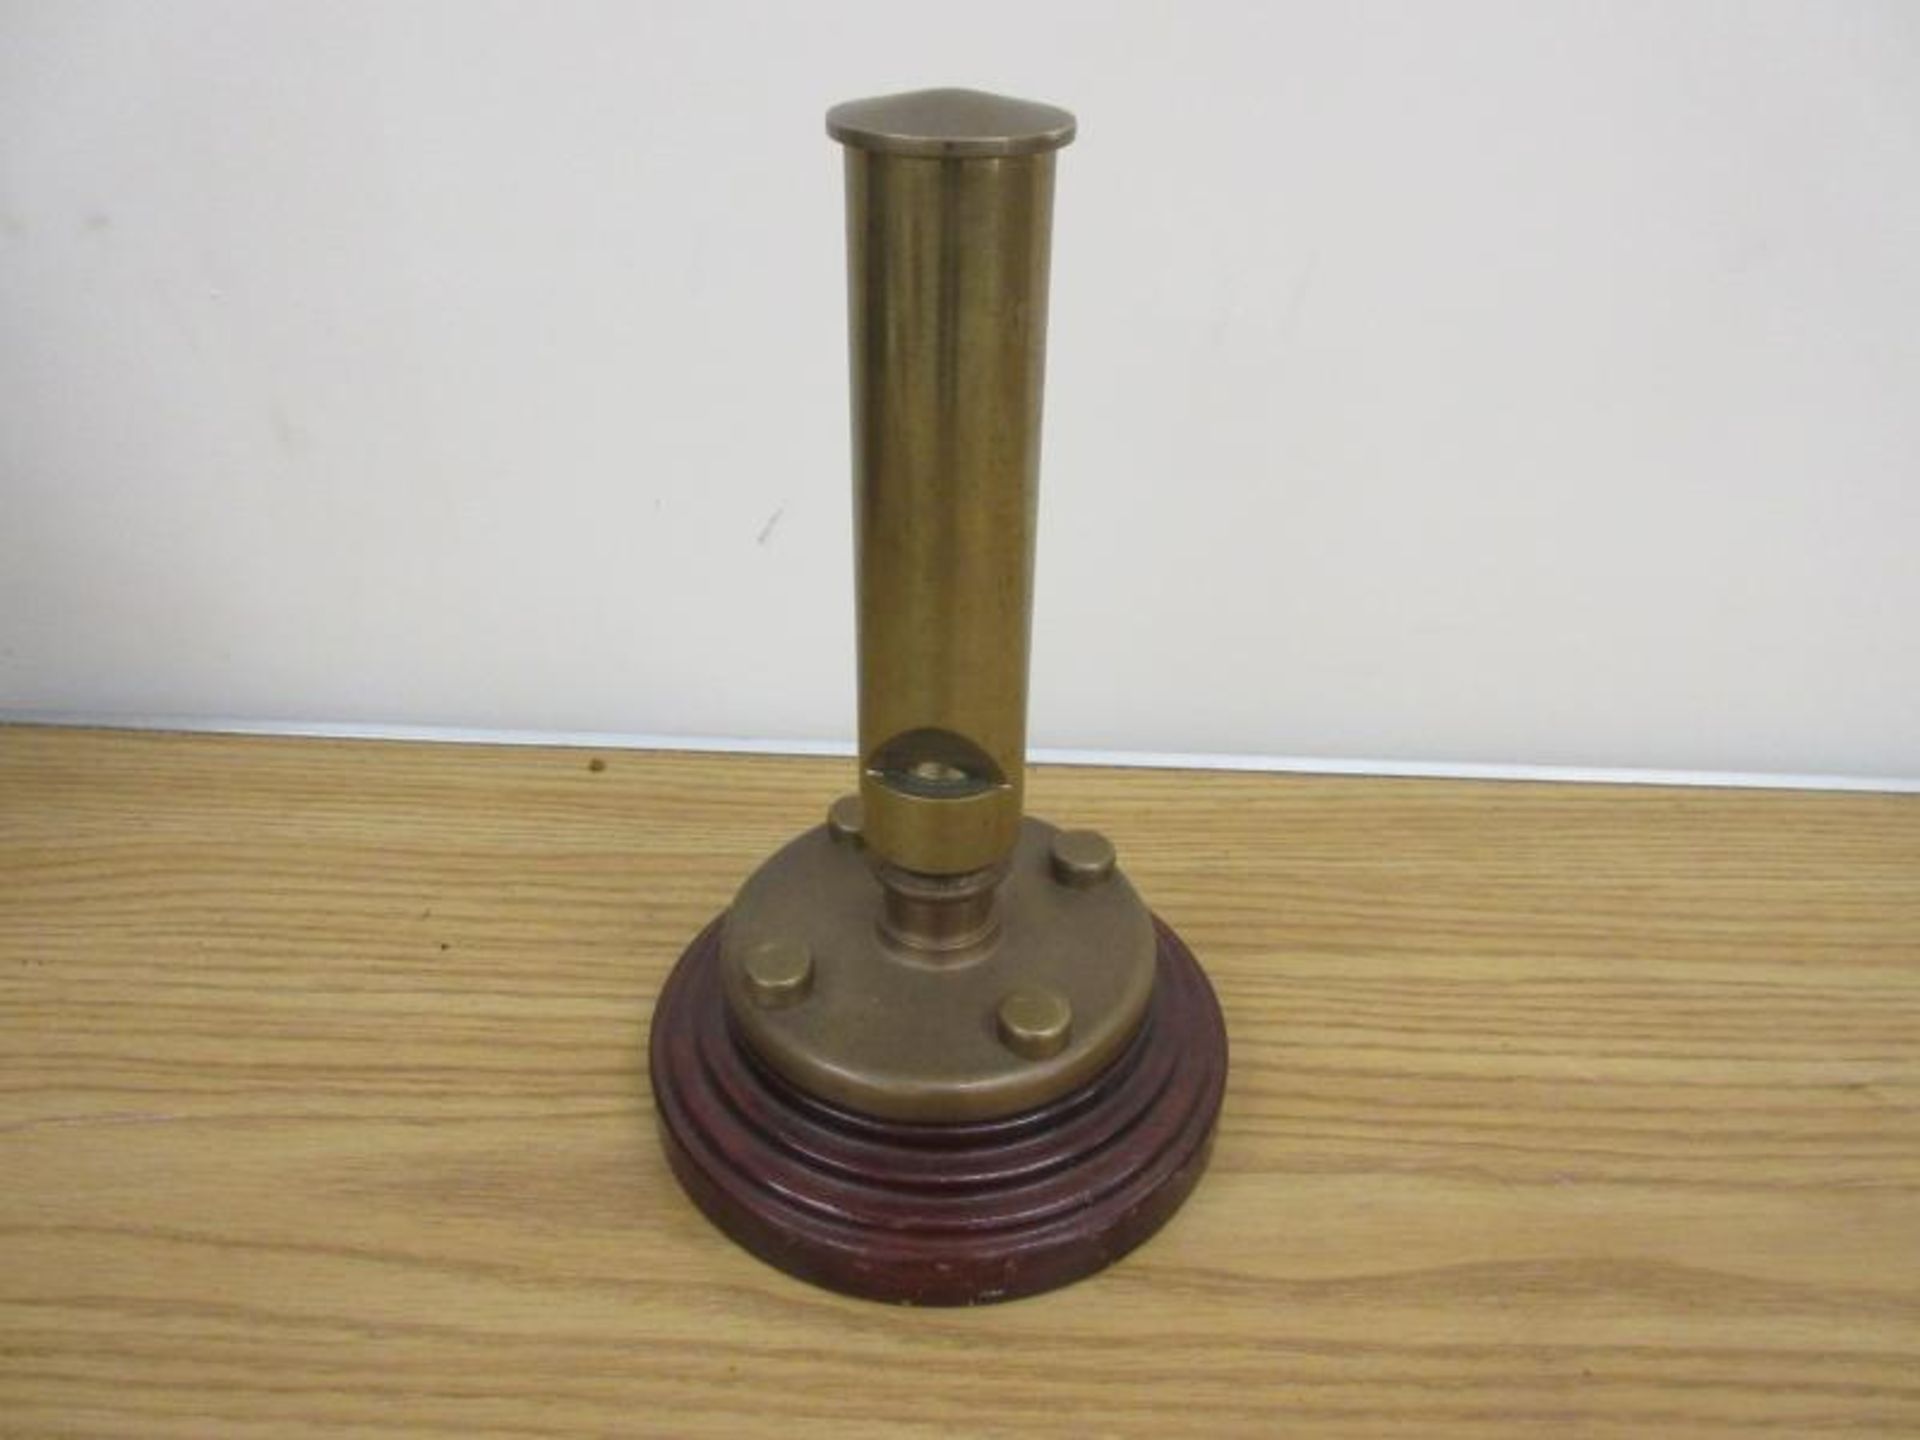 Steam brass whistle mounted on a plinth